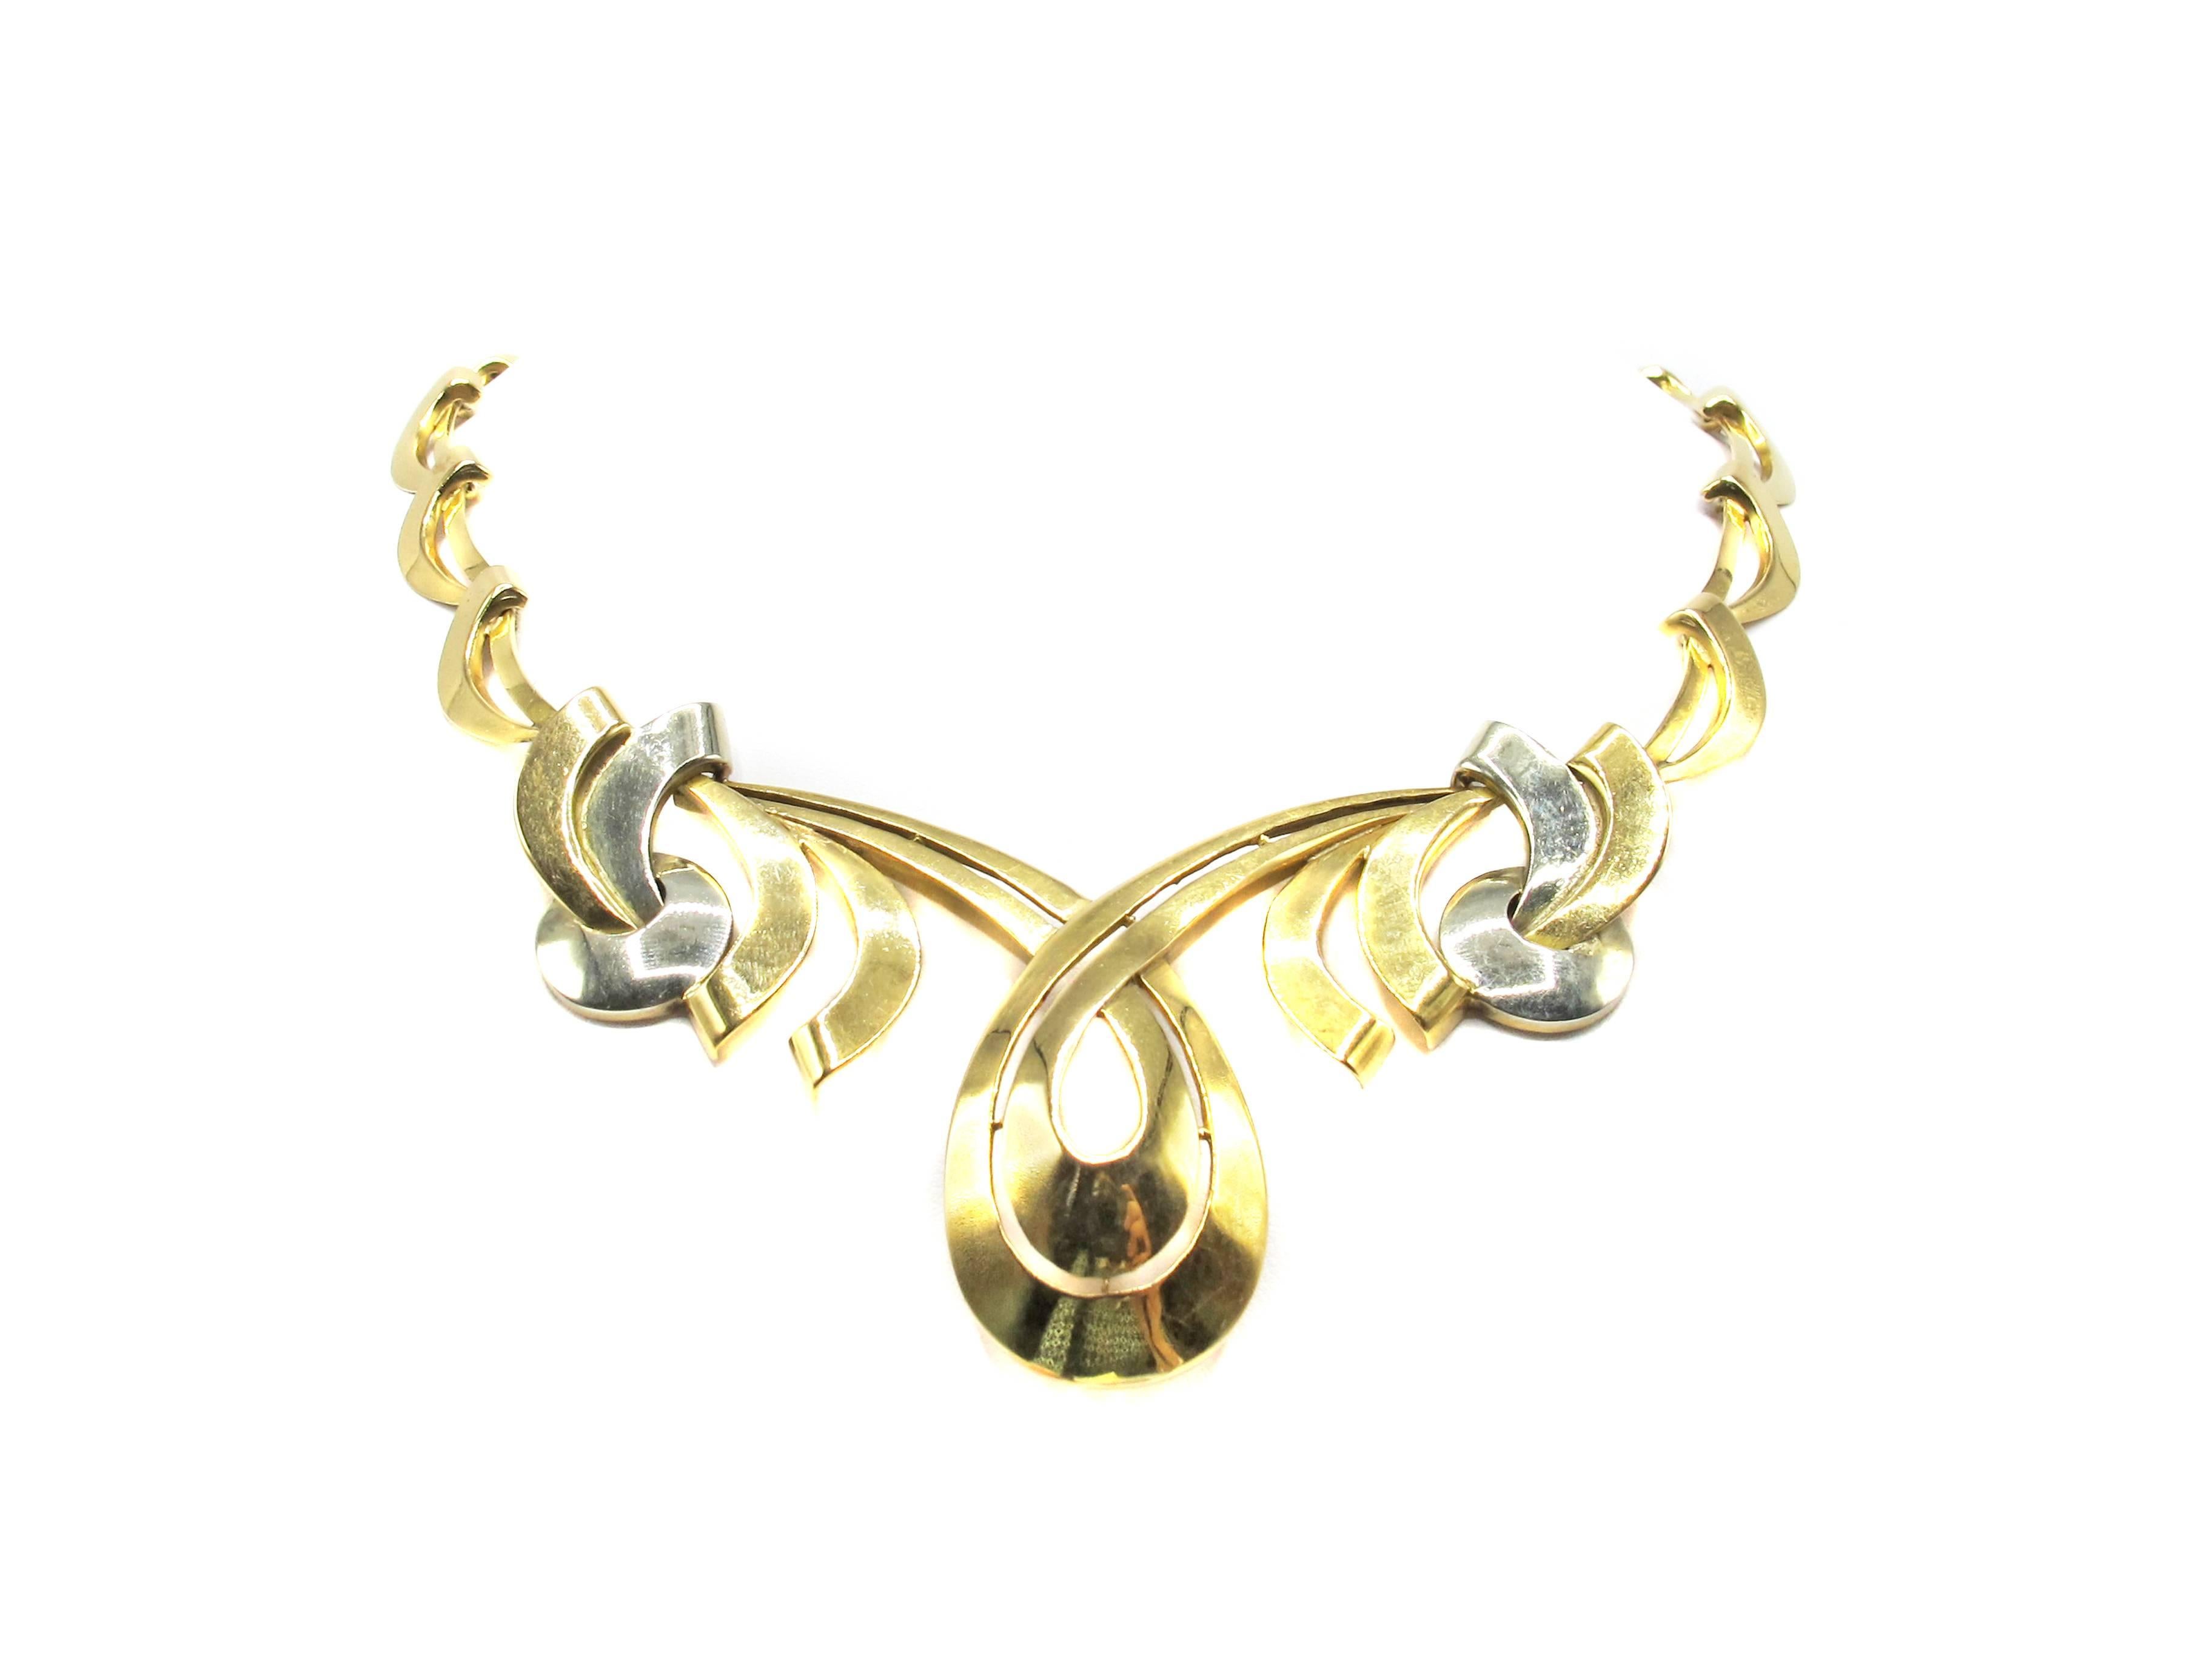 This wonderfully designed and hand crafted 18 karat gold necklace truly shows its 3 dimensional artistic character. The French necklace from ca 1940 is composed of 7 straight and curved elements on either side which are all flexible making this